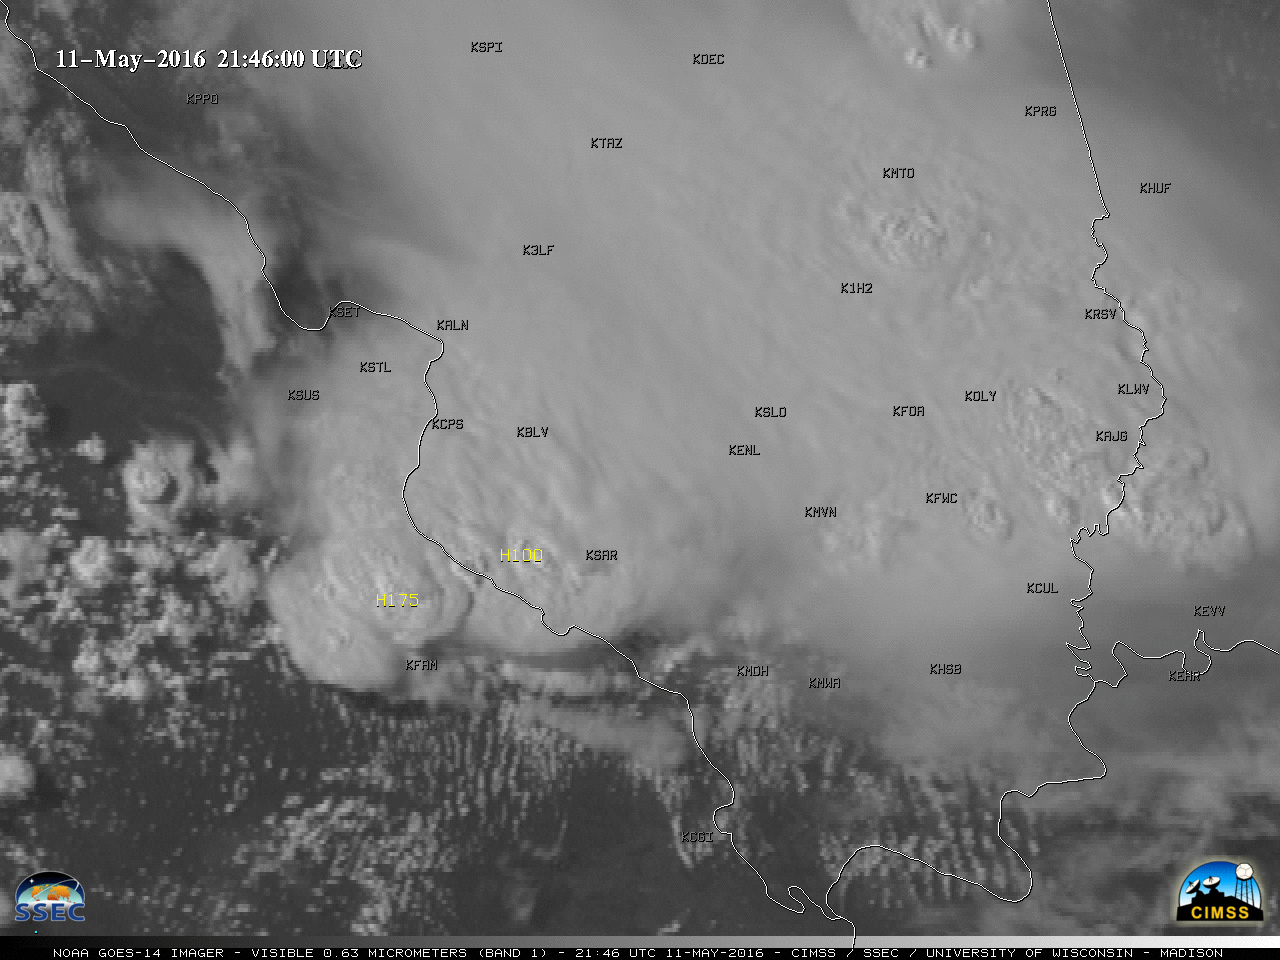 GOES-14 Visible (0.63 µm) images, with parallax-corrected SPC storm reports [click to play MP4 animation]